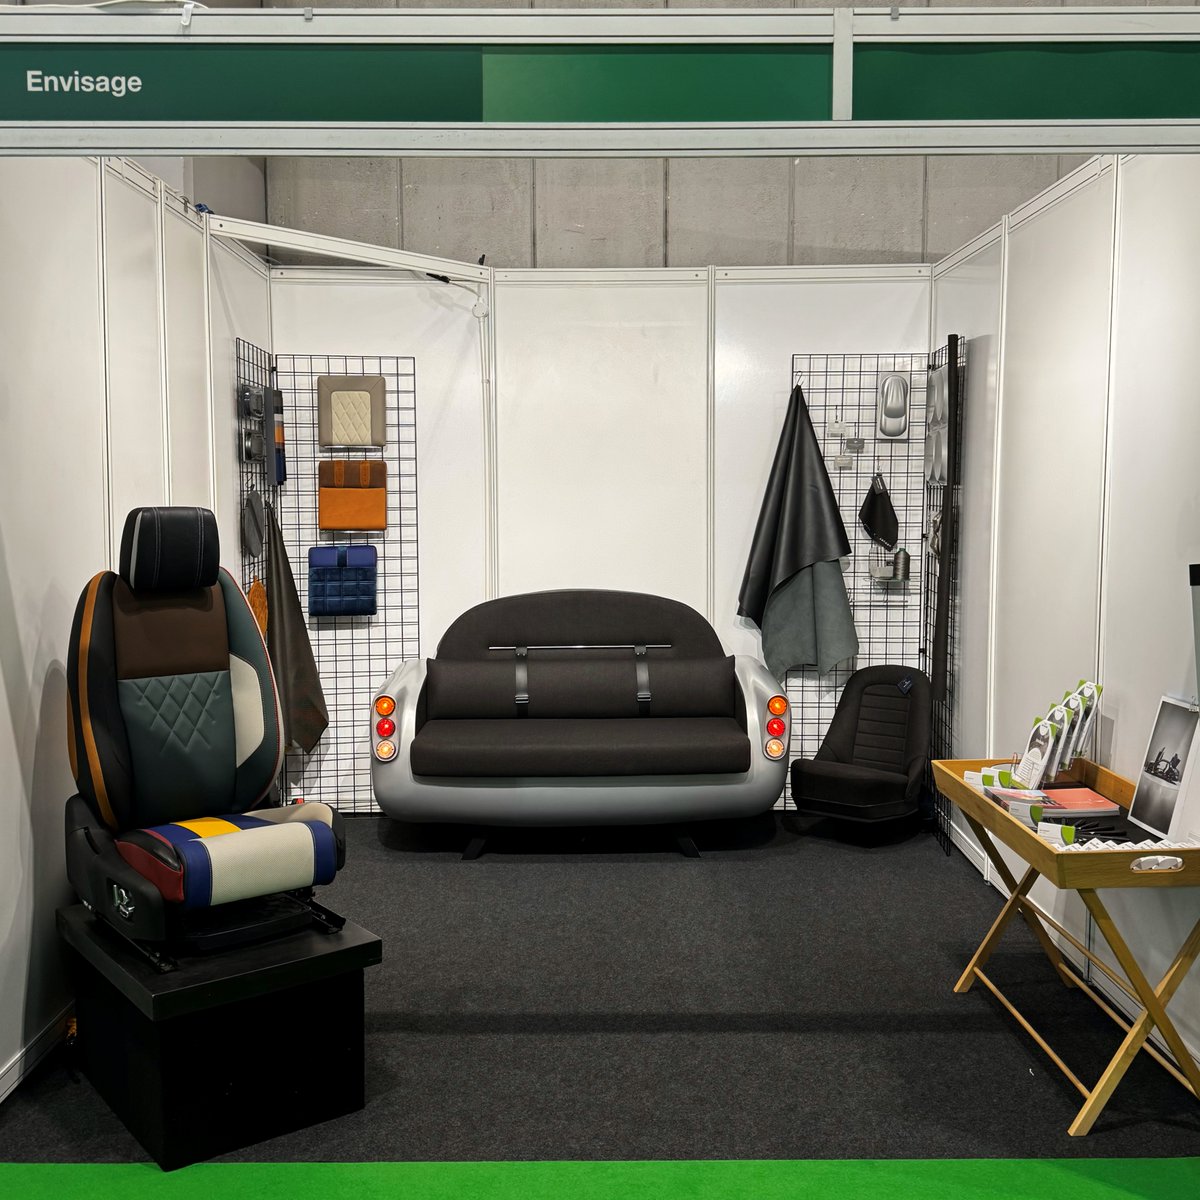 We had a great time at the Caravan, Camping and Motorhome Show 2024 discussing exciting opportunities for restoration, renovation and re-trimming! 
#CaravanCampingandMotorhomeShow2024 #CaravanCampingandMotorhomeShow #NEC #Birmingham #NECBirmingham #Exhibition #CMF #Envisage